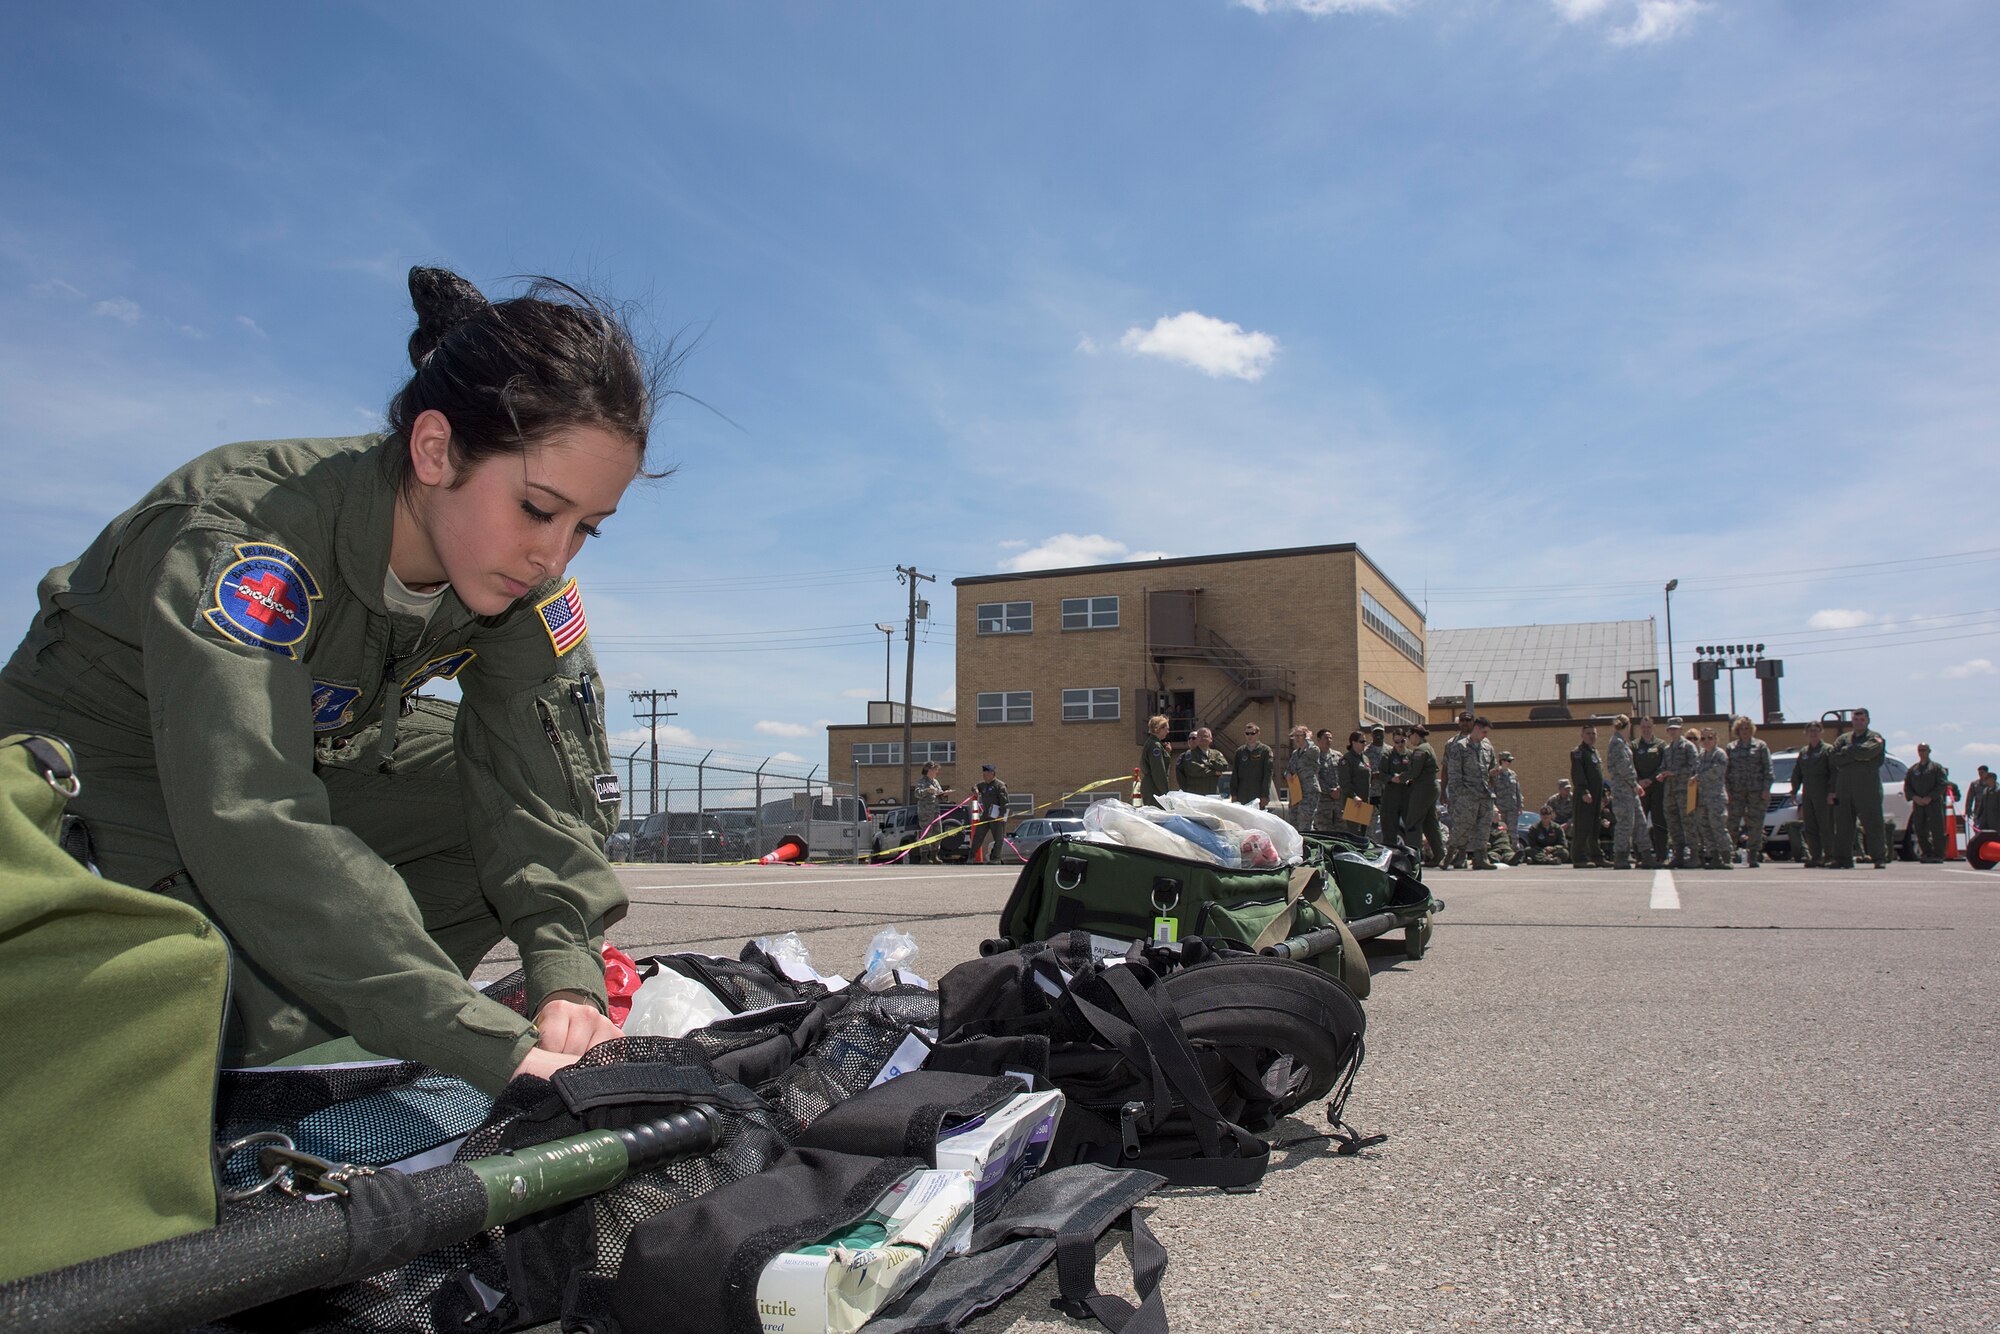 U.S. Air Force Senior Airman First Class Dominique Dimatteo, assigned to the 142nd Aeromedical Evacuation Squadron, digs through an equipment bag during a training event on Will Rogers Air National Guard Base, Okla., April 15, 2016. (U.S. Air National Guard photo by Tech. Sgt. Caroline Essex/Released)